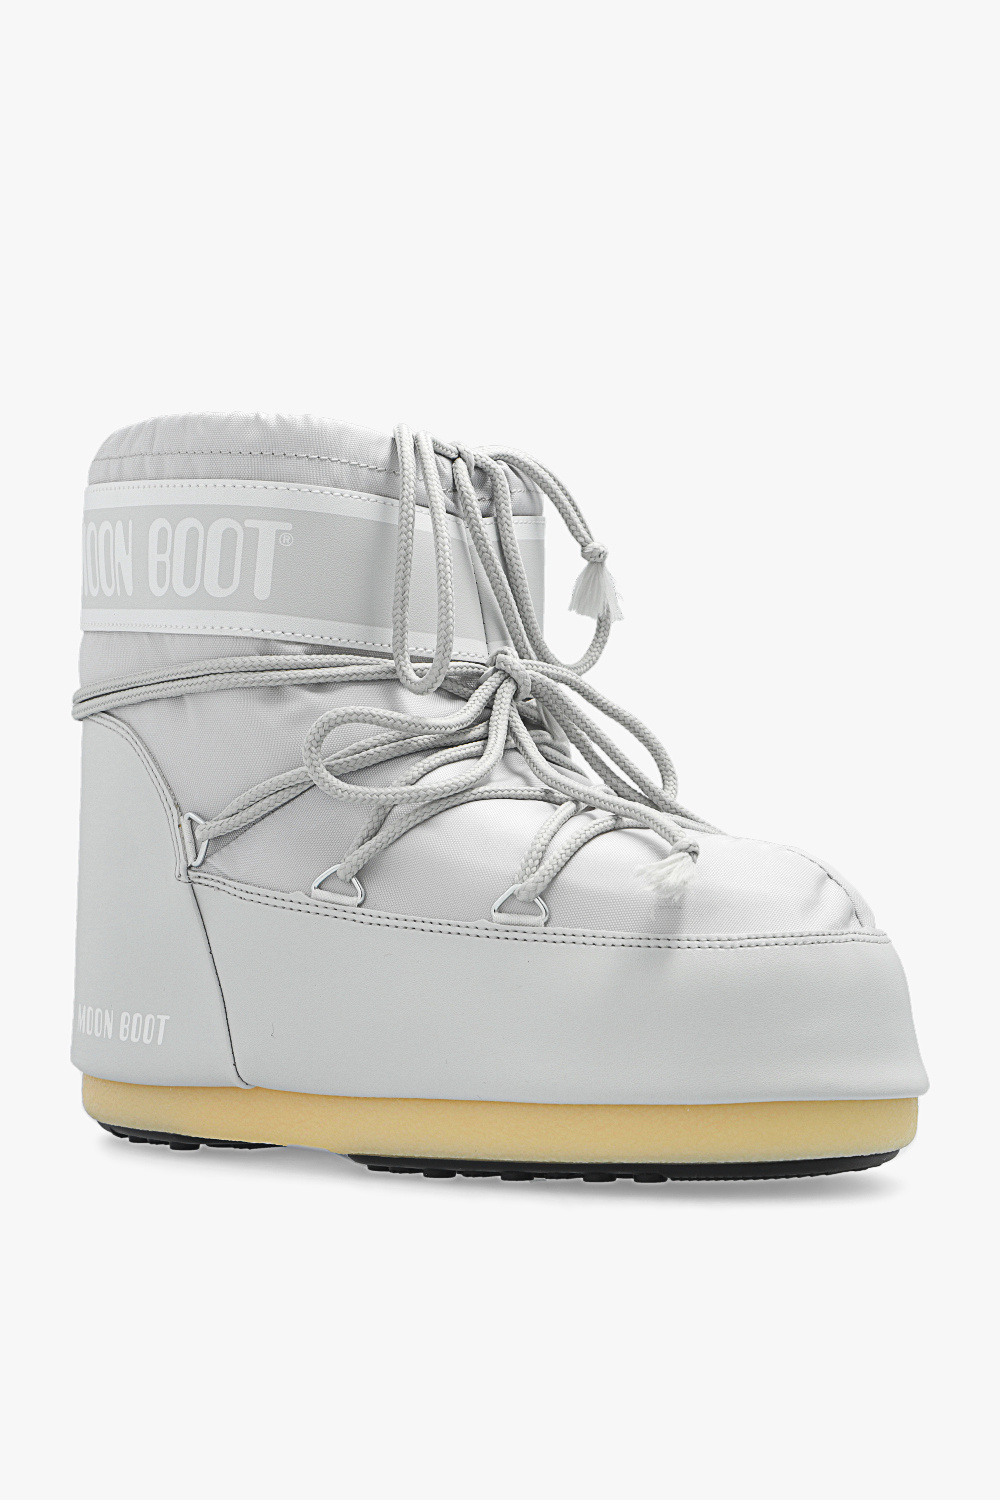 Moon Boot ‘Icon Low’ dc8466-250 boots